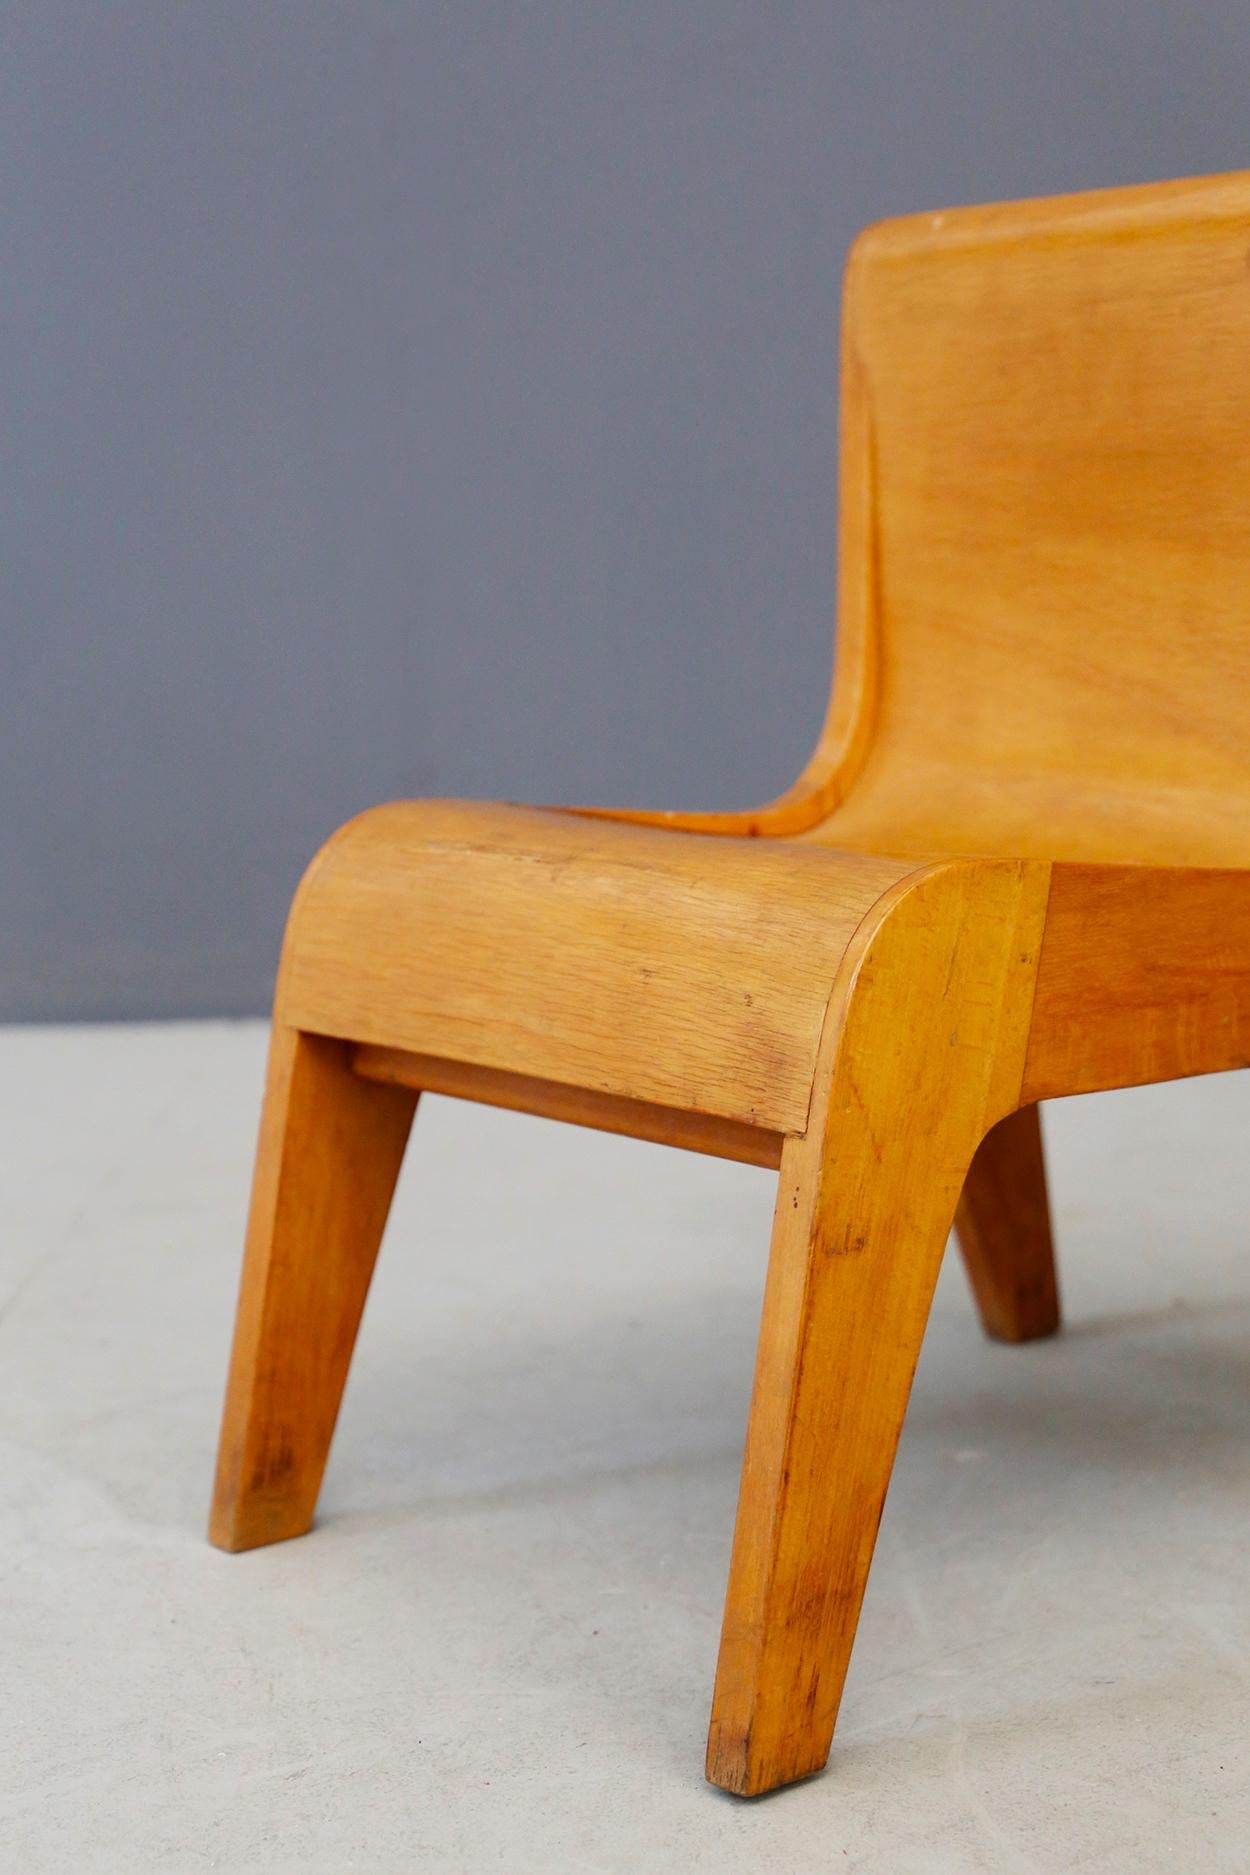 Small children's chair made as a prototype by the Italian master cabinetmaker Pierluigi Ghianda. The small chair is made entirely of wood and shows great mastery in its design. Taken directly from Bottega Ghianda.
The small chair is ideal for